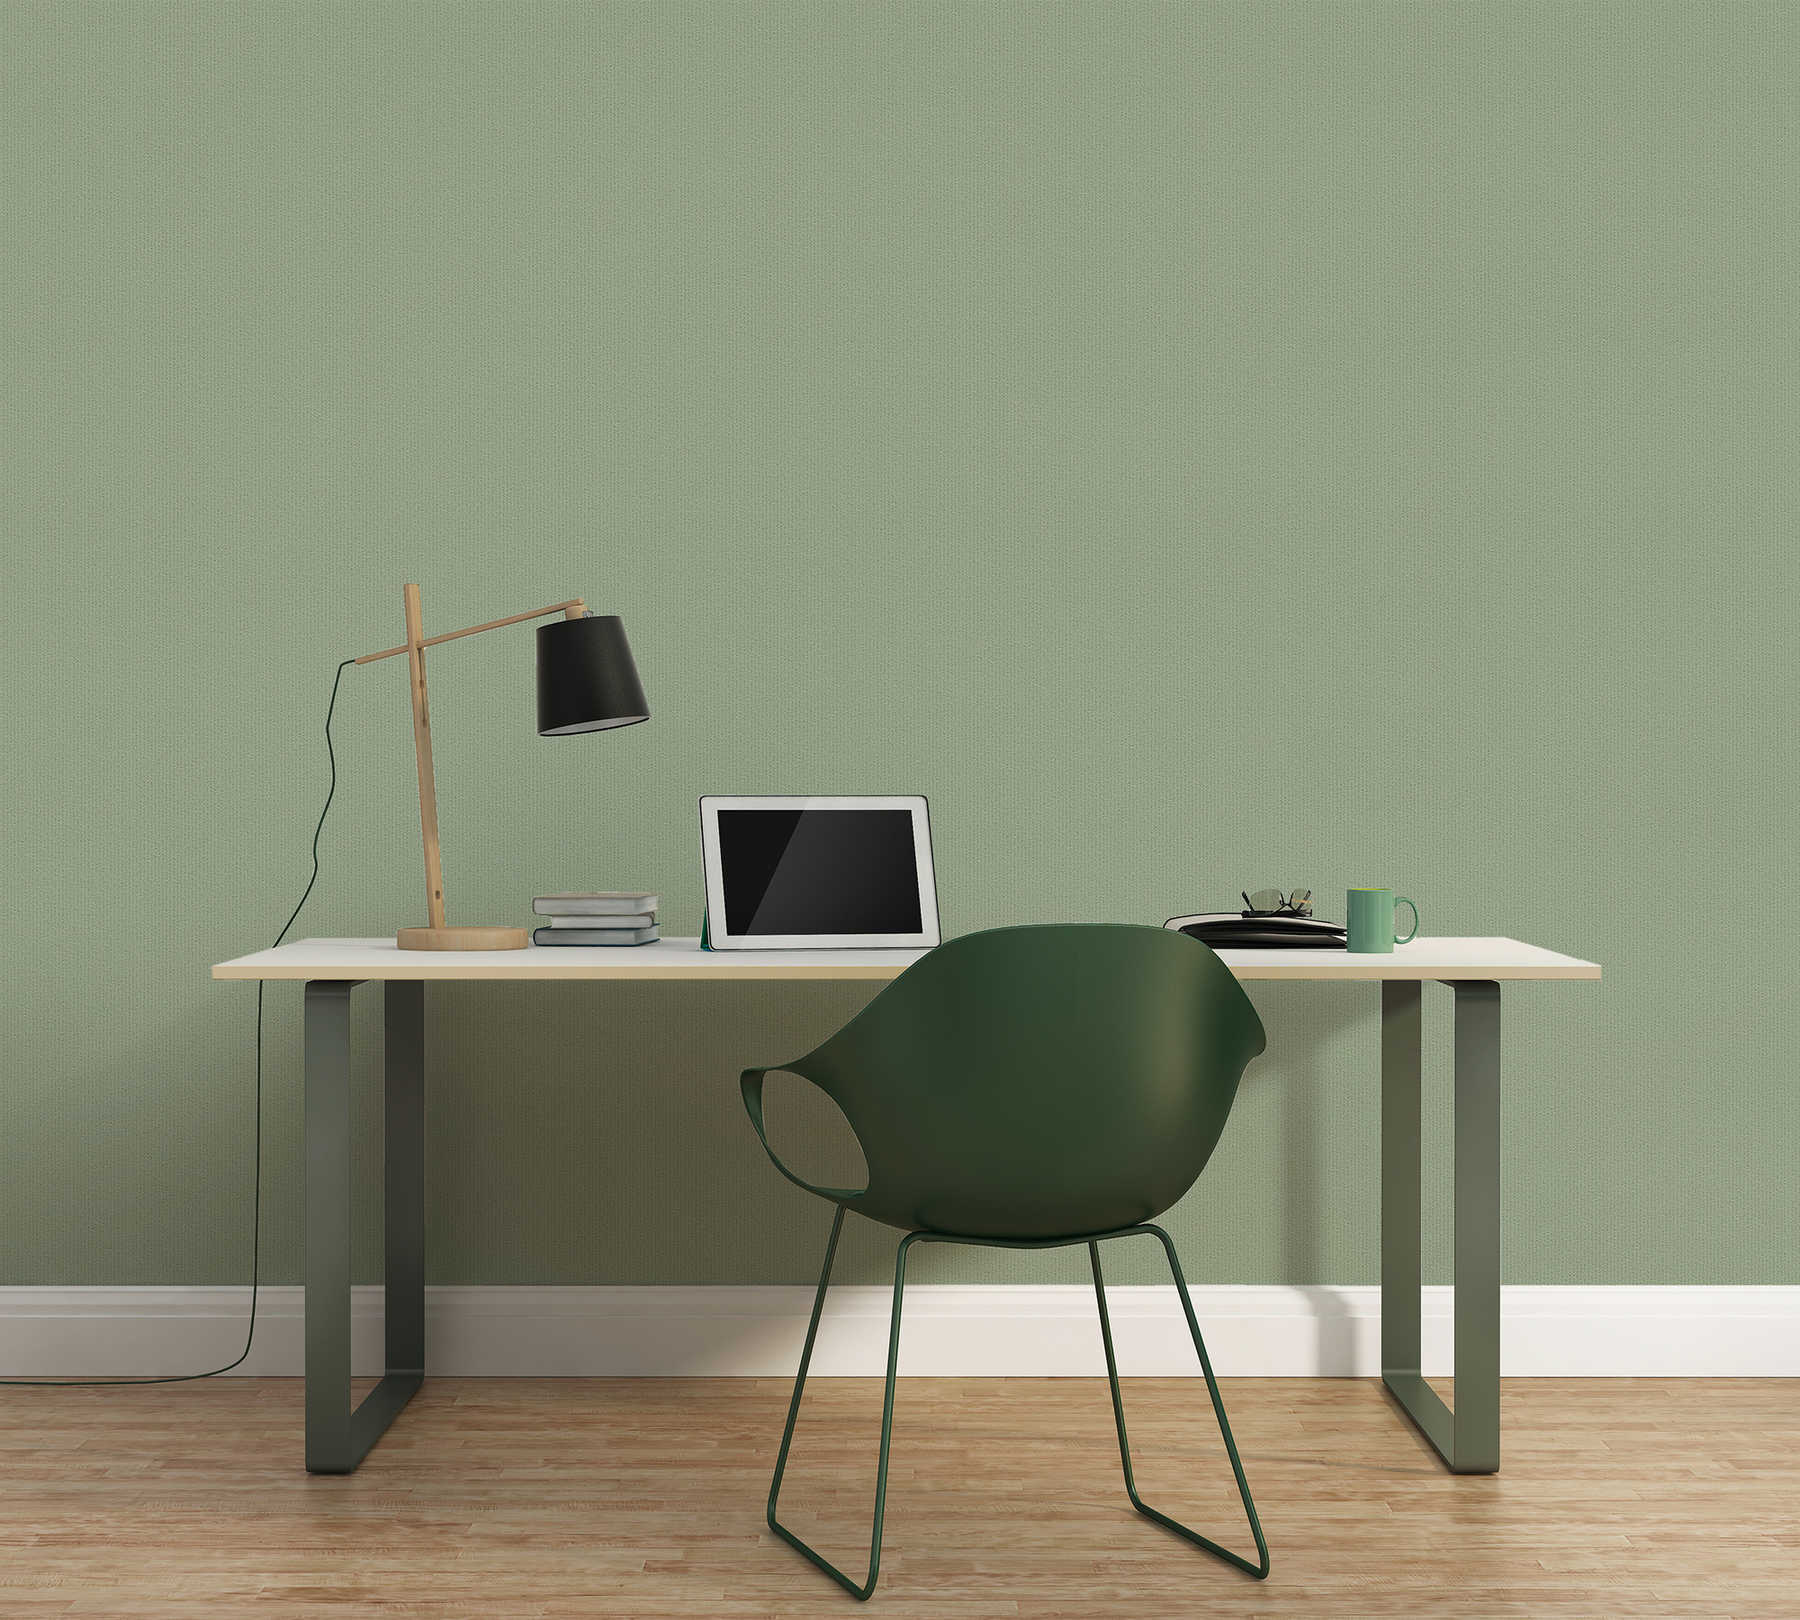             Structure wallpaper with stripes design - green
        